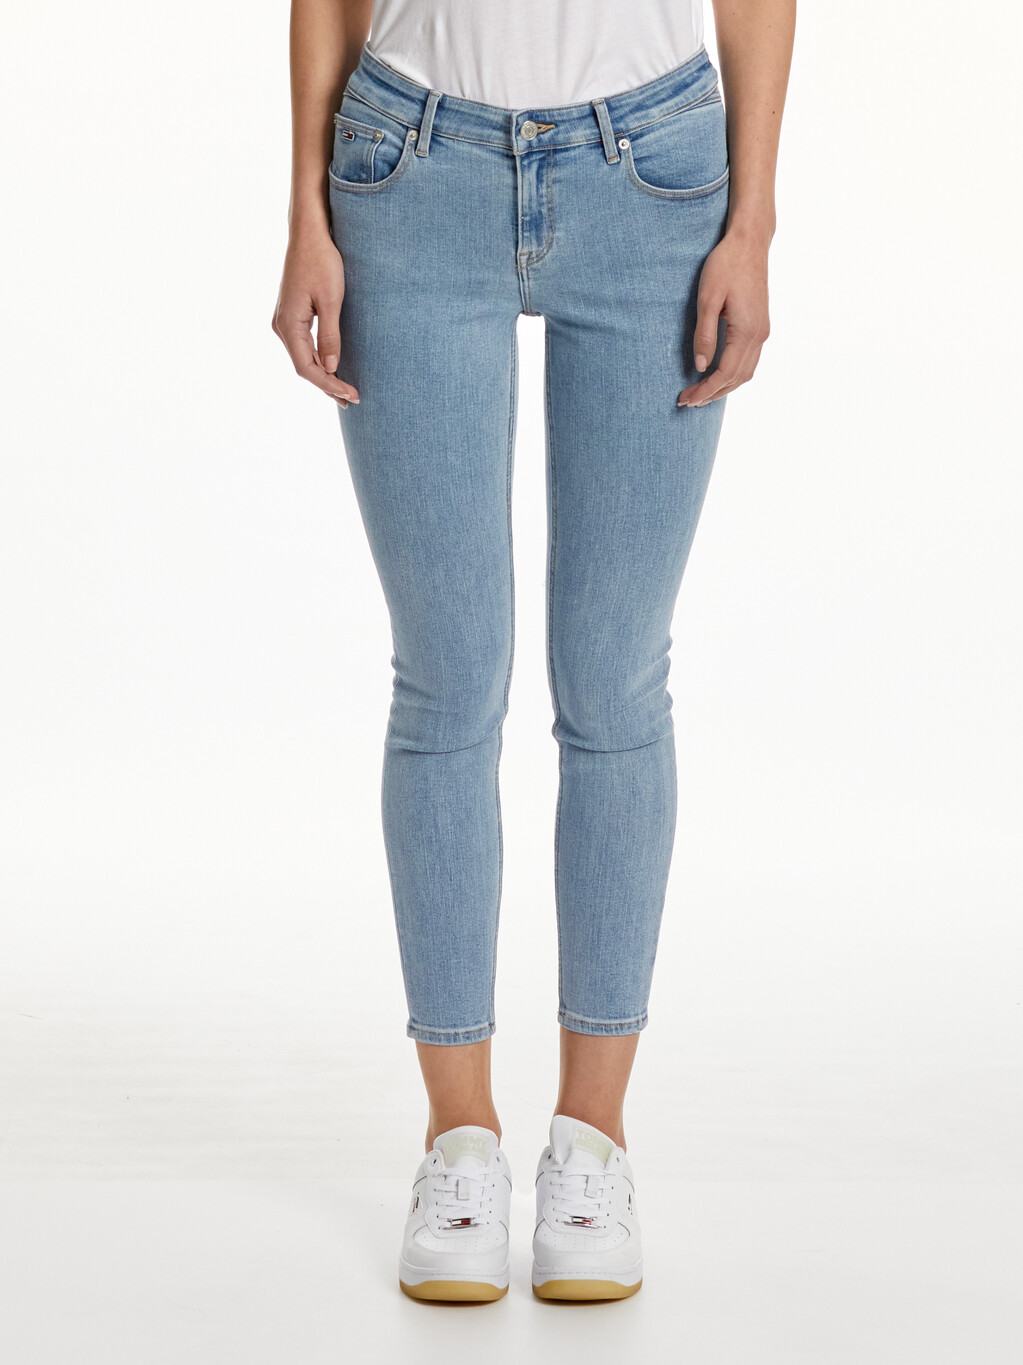 Buy SHAPE SKINNY ANKLE JEANS in color BLUE